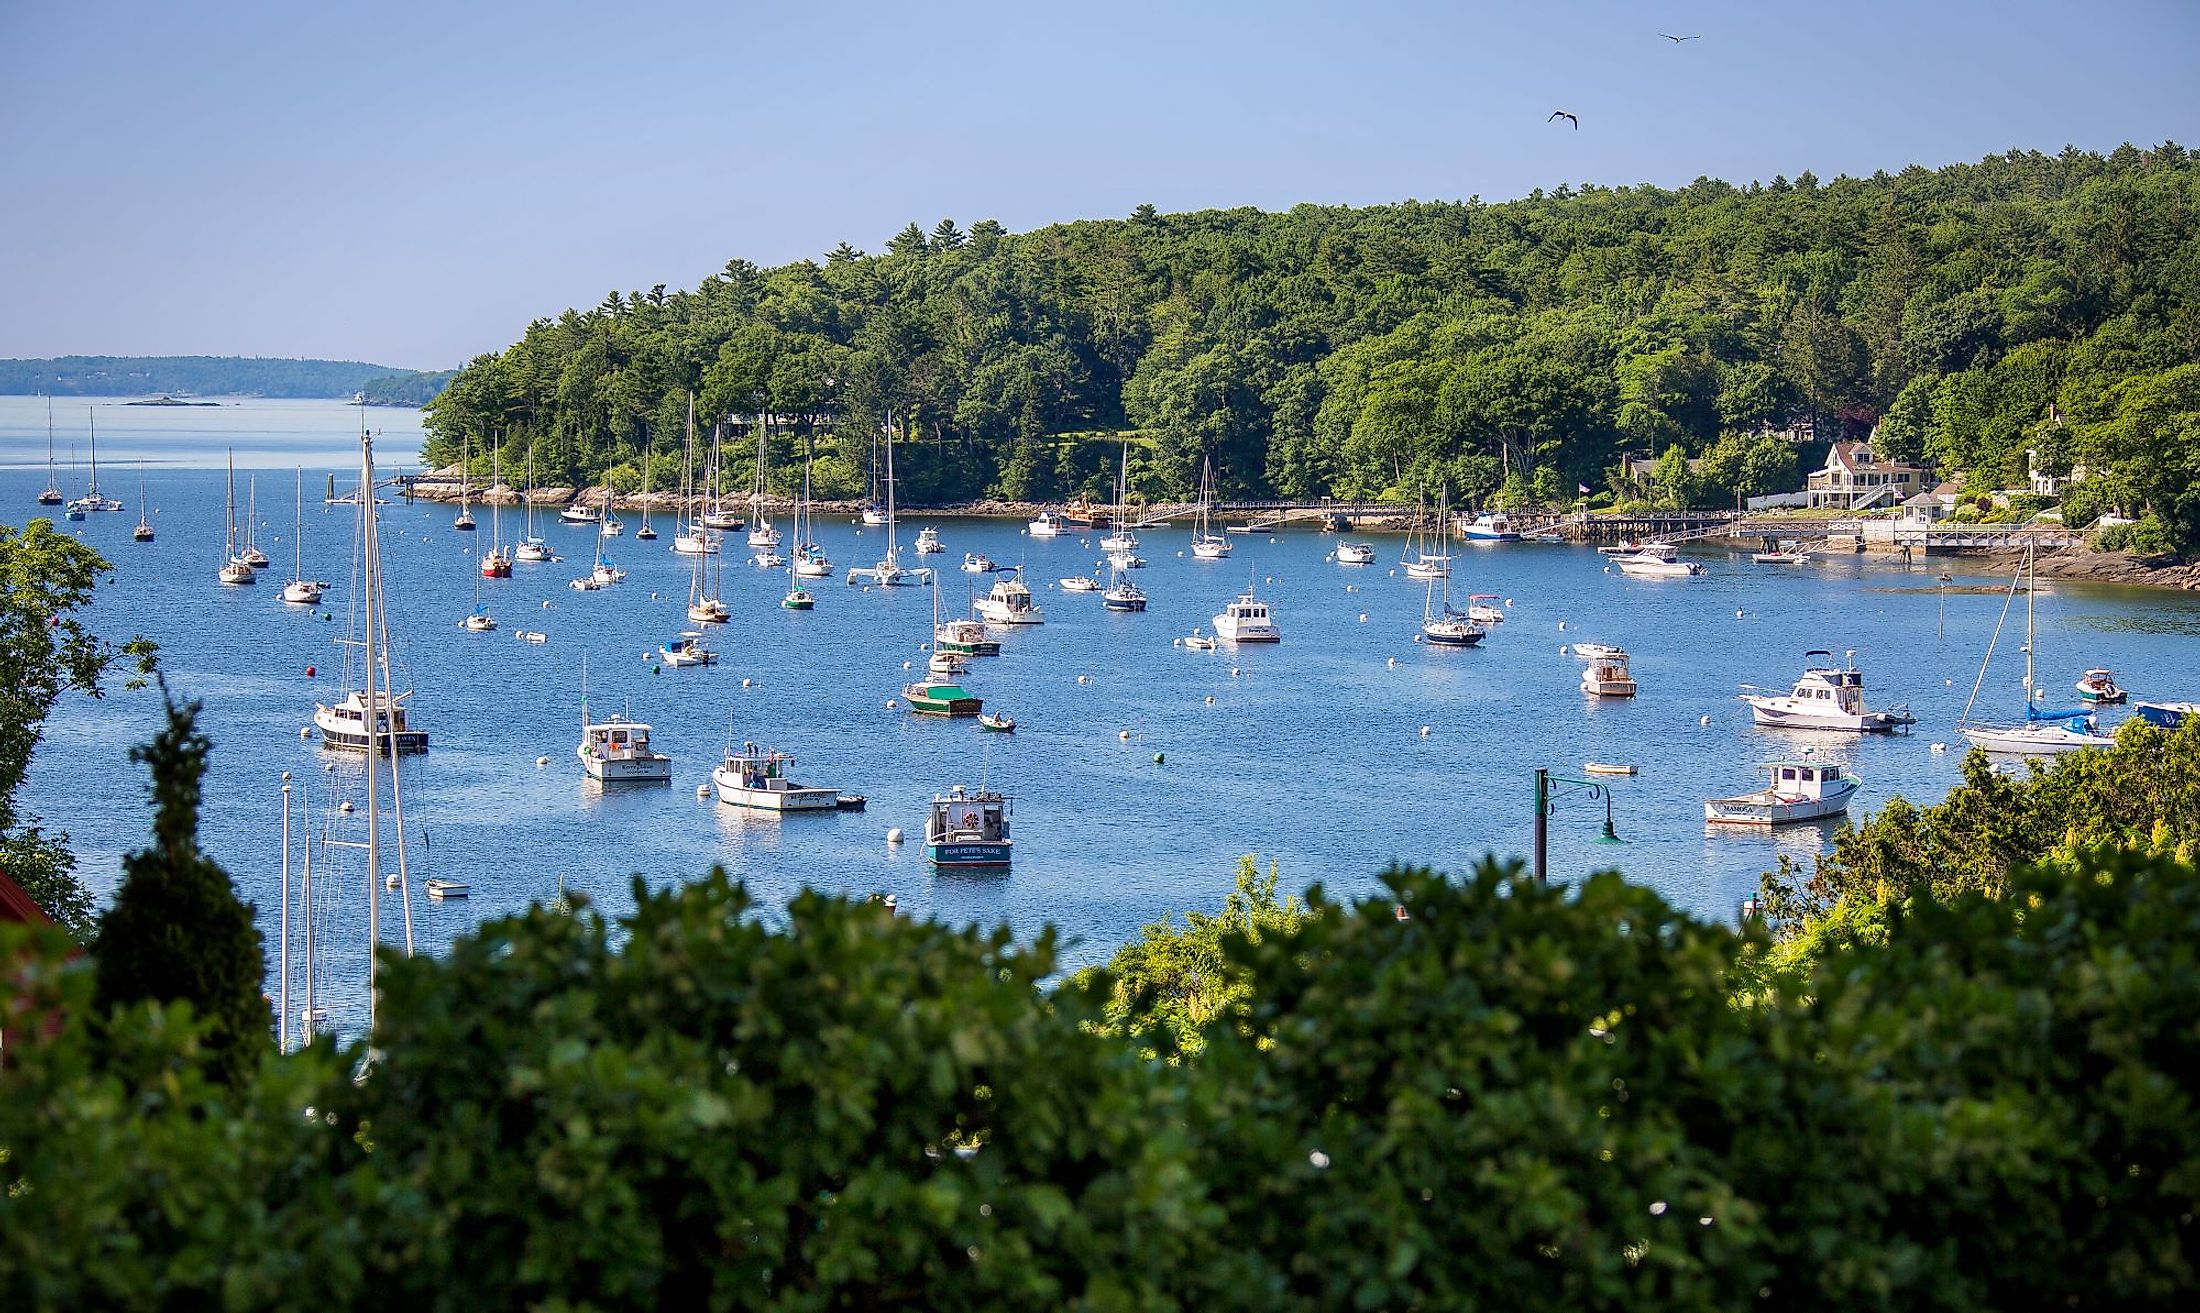 Sailboats and motorboats rest at anchor in Rockport Harbor, Maine, on a beautiful summer day. Editorial credit: James Dalrymple / Shutterstock.com